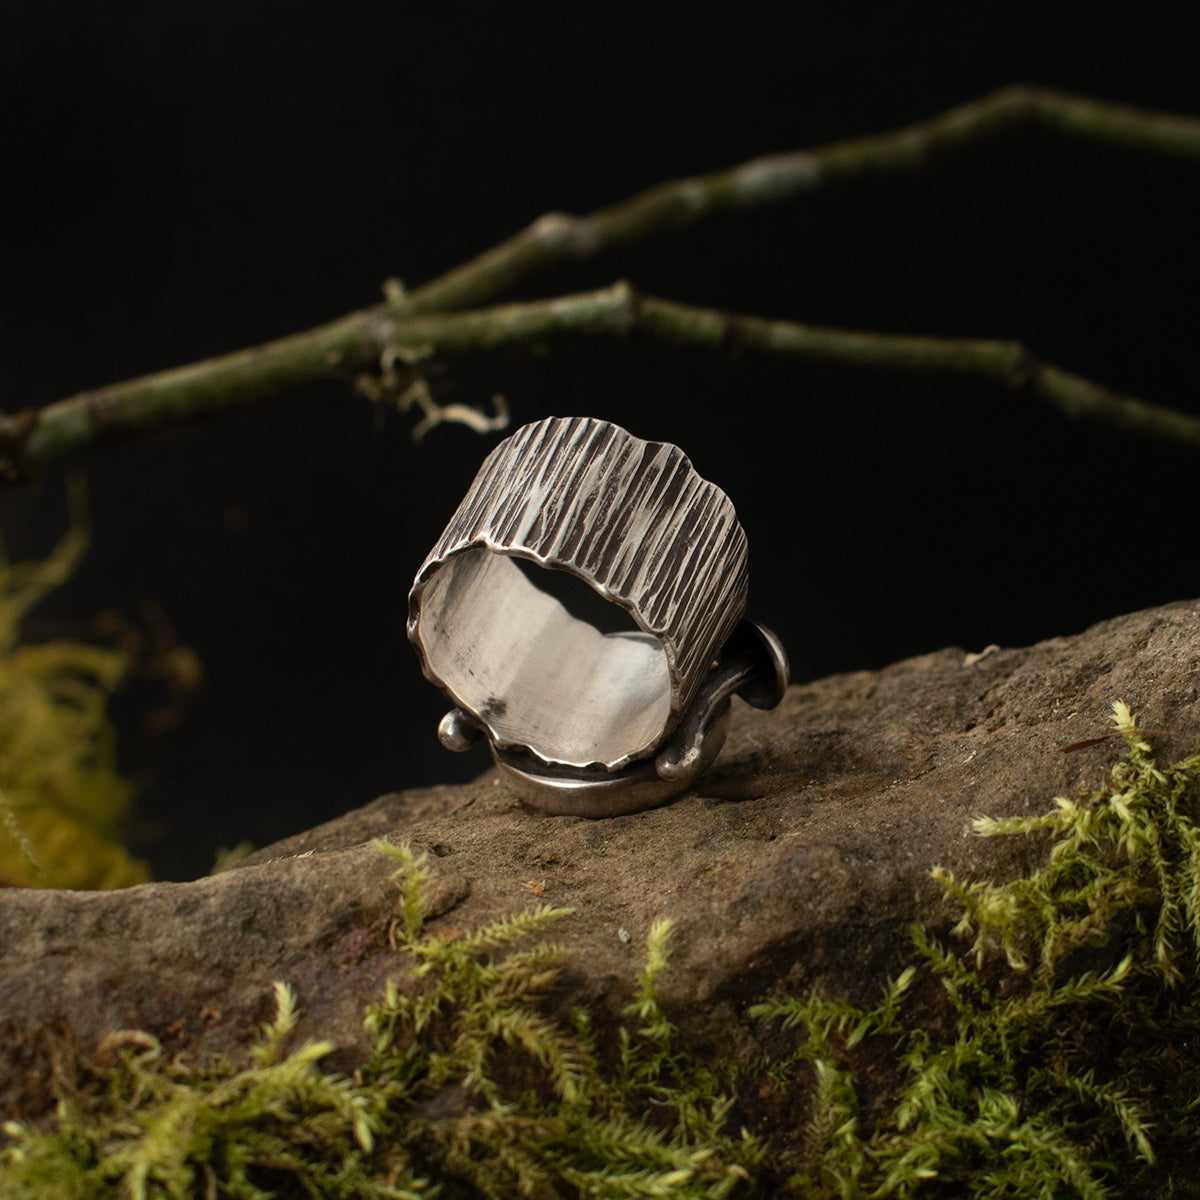 The underside of the Real Lichen Double Toadstool Ring shows its wide size 5 1/2 sterling silver ring band, textured to look like tree bark.